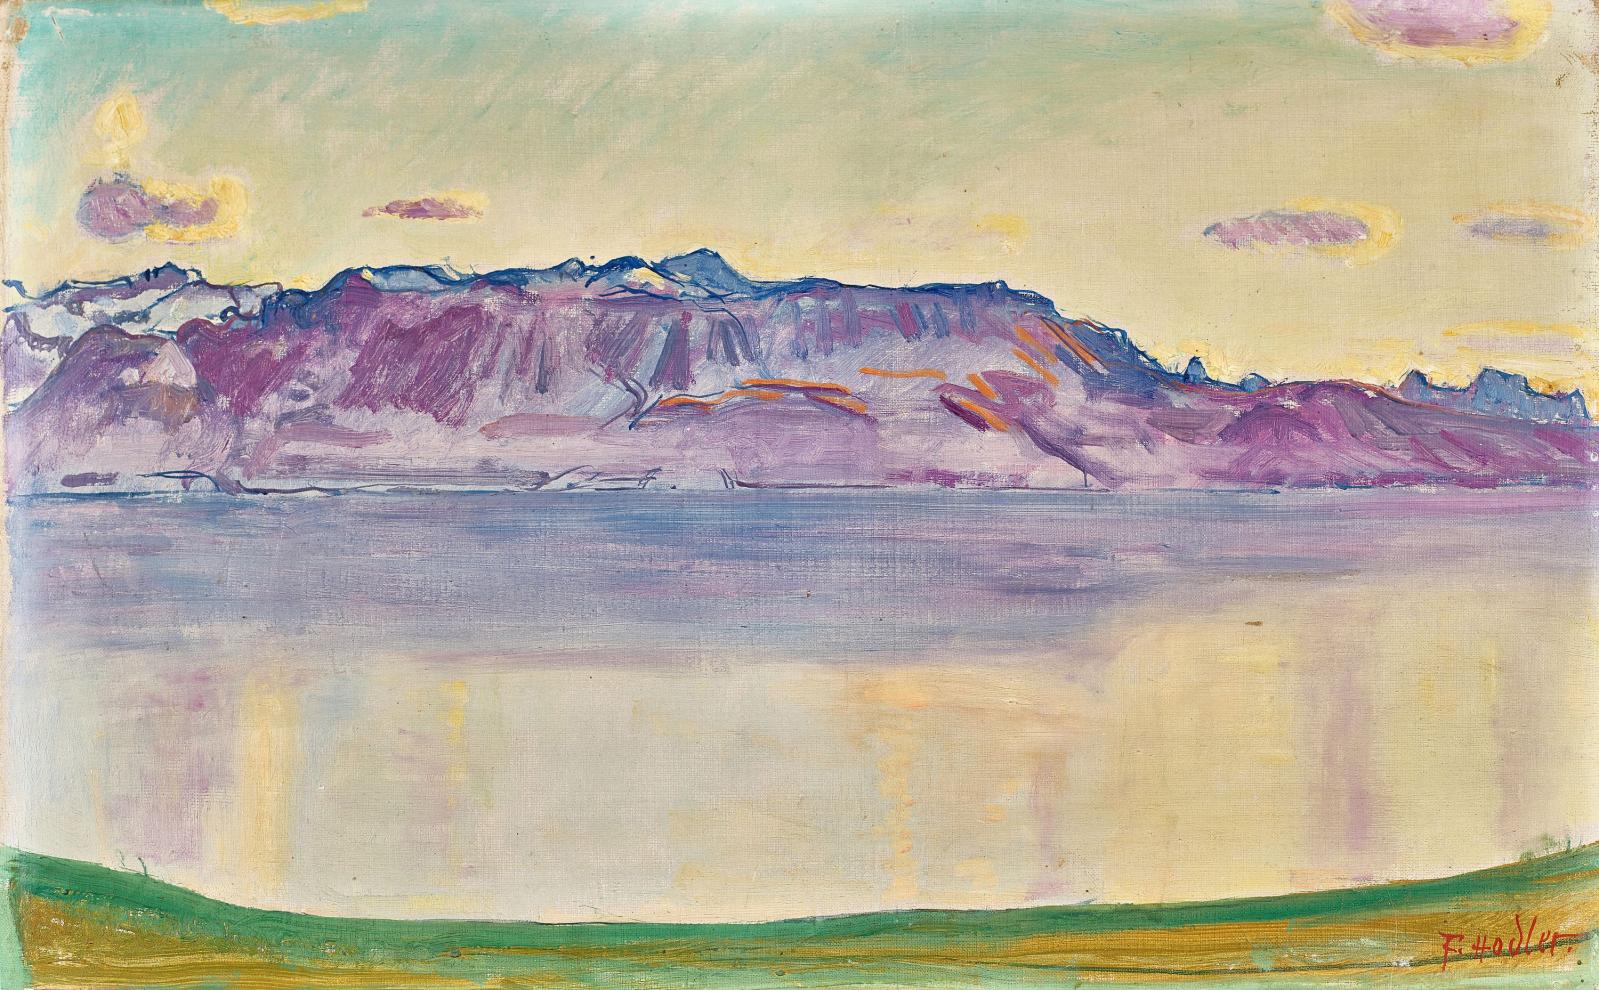 The Science of Nature According to Hodler